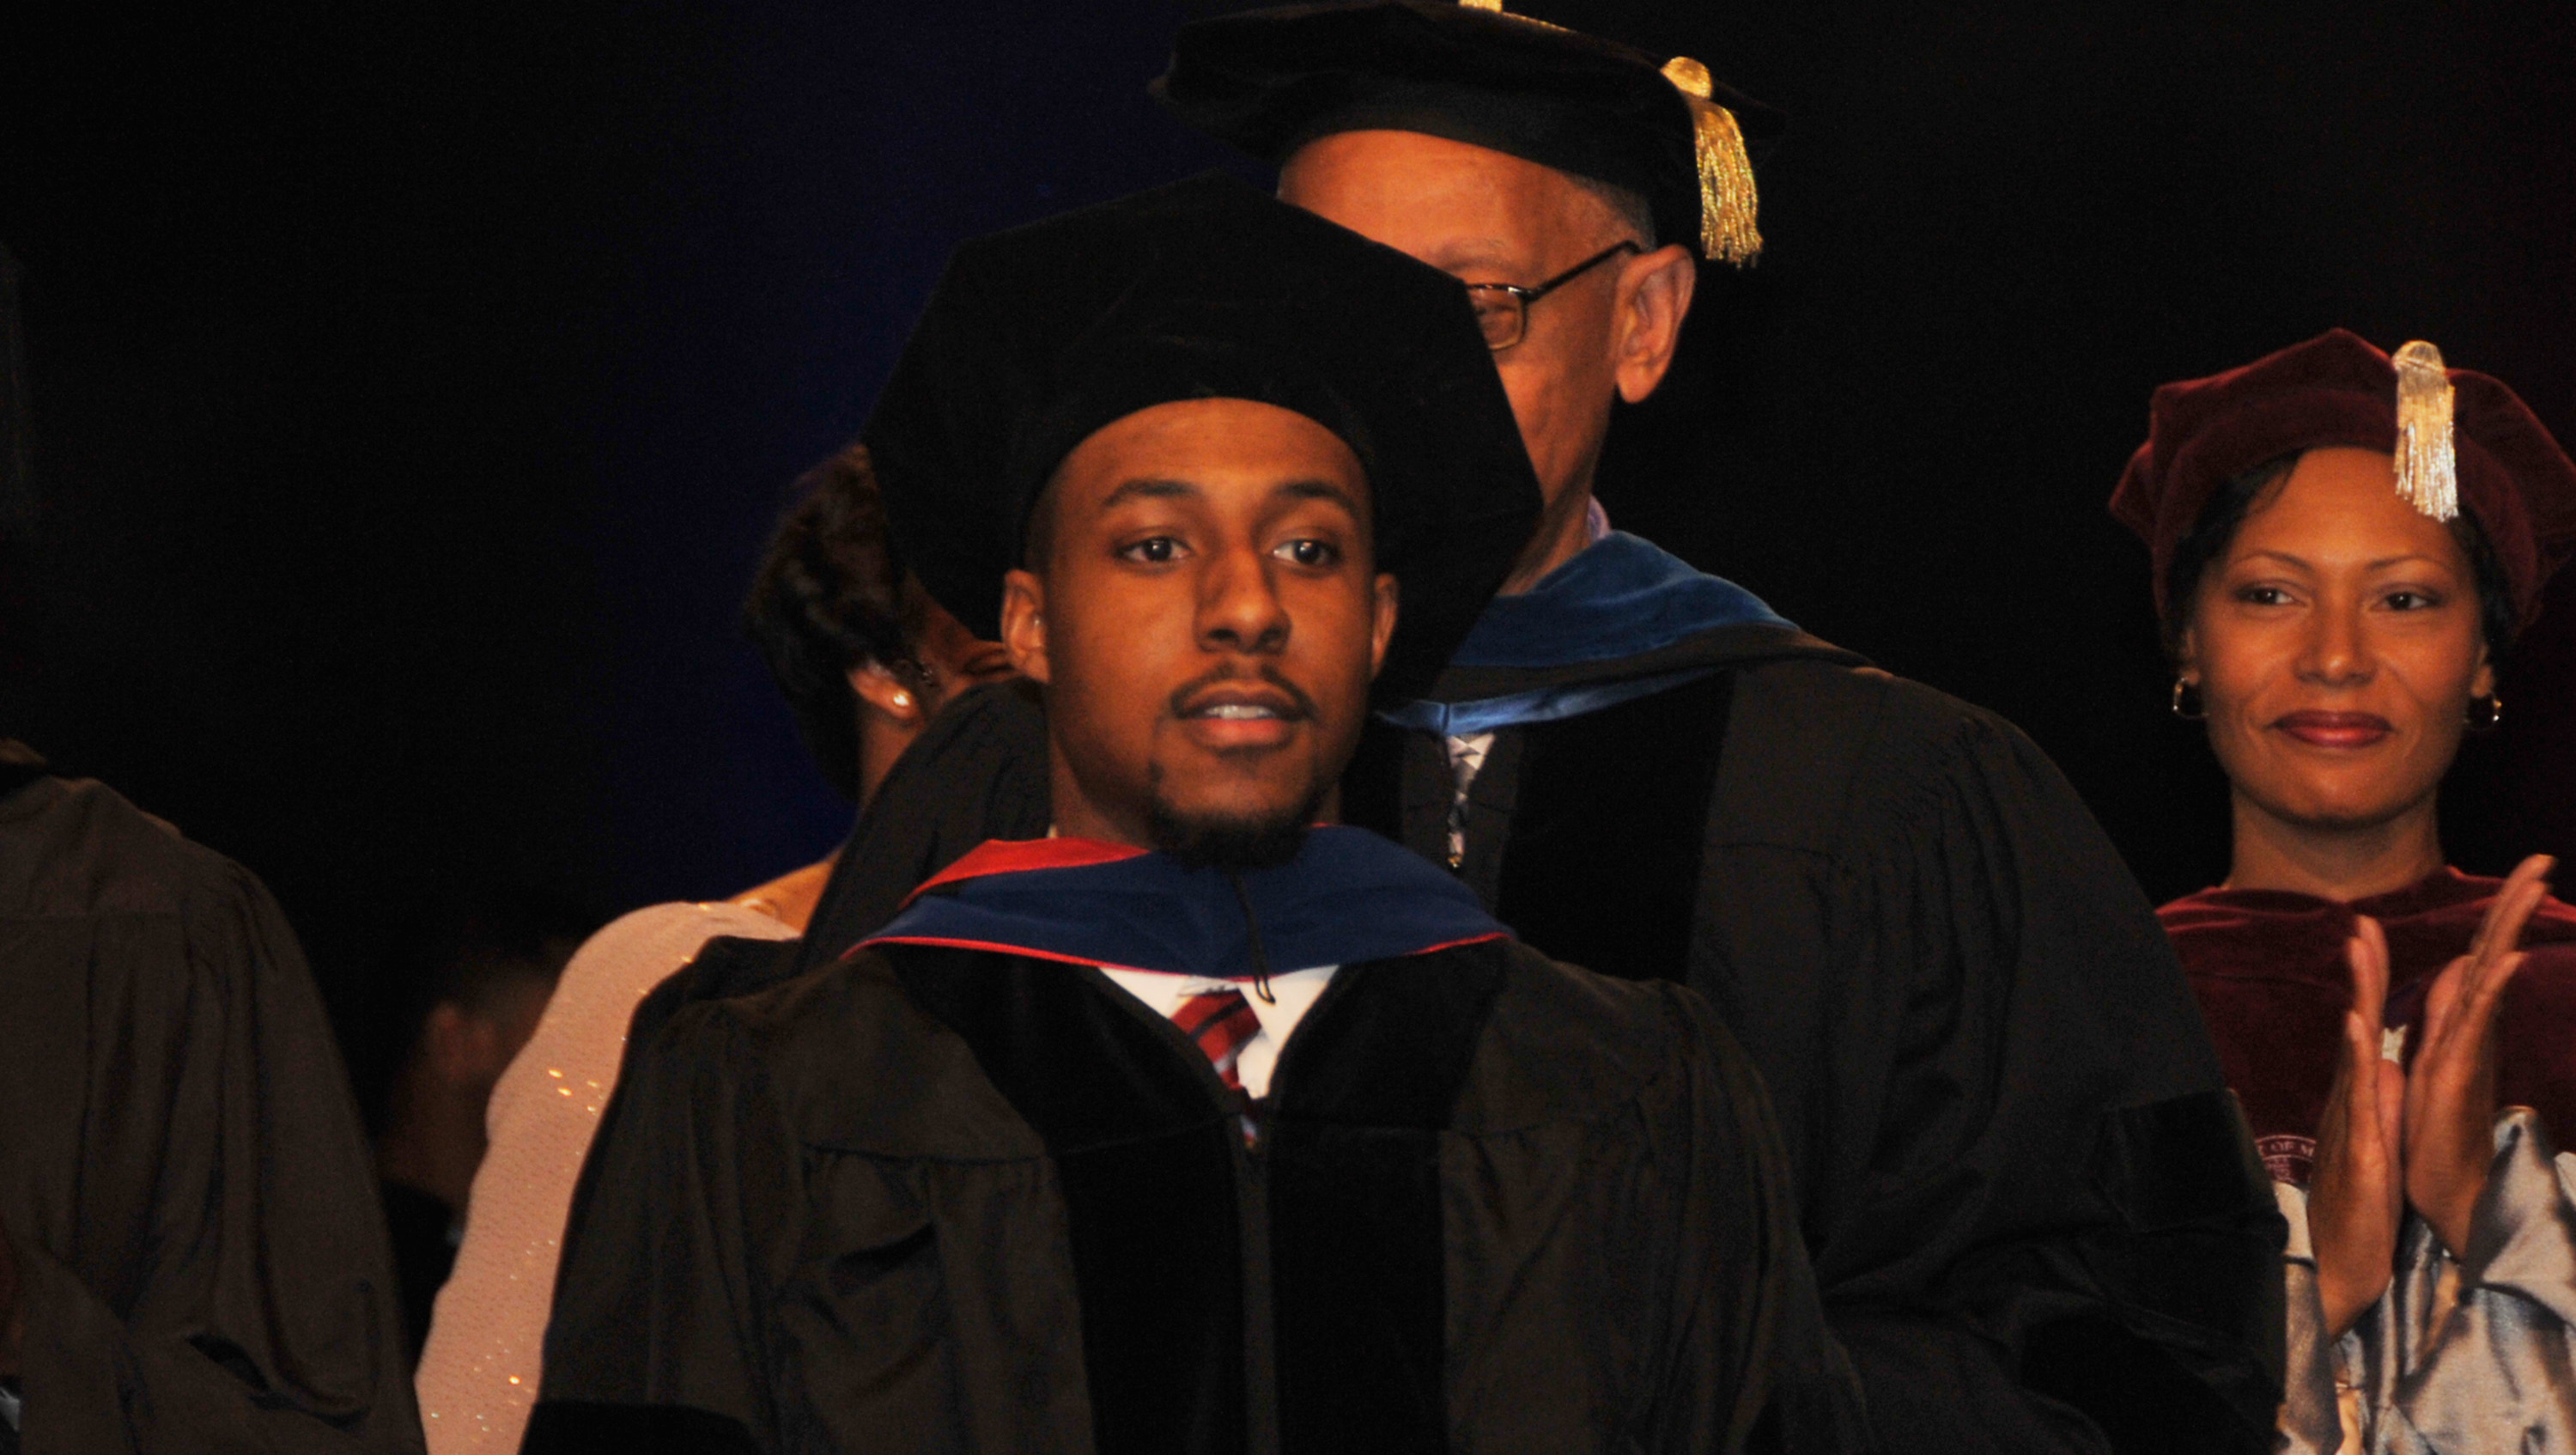 Dr. Jalaal Hayes -- shown in December 2015 when he became the youngest ever Ph.D. graduate in DSU history -- is now being honored as the Top Influential Chemist of the Year by the International Association of Top Professionals.